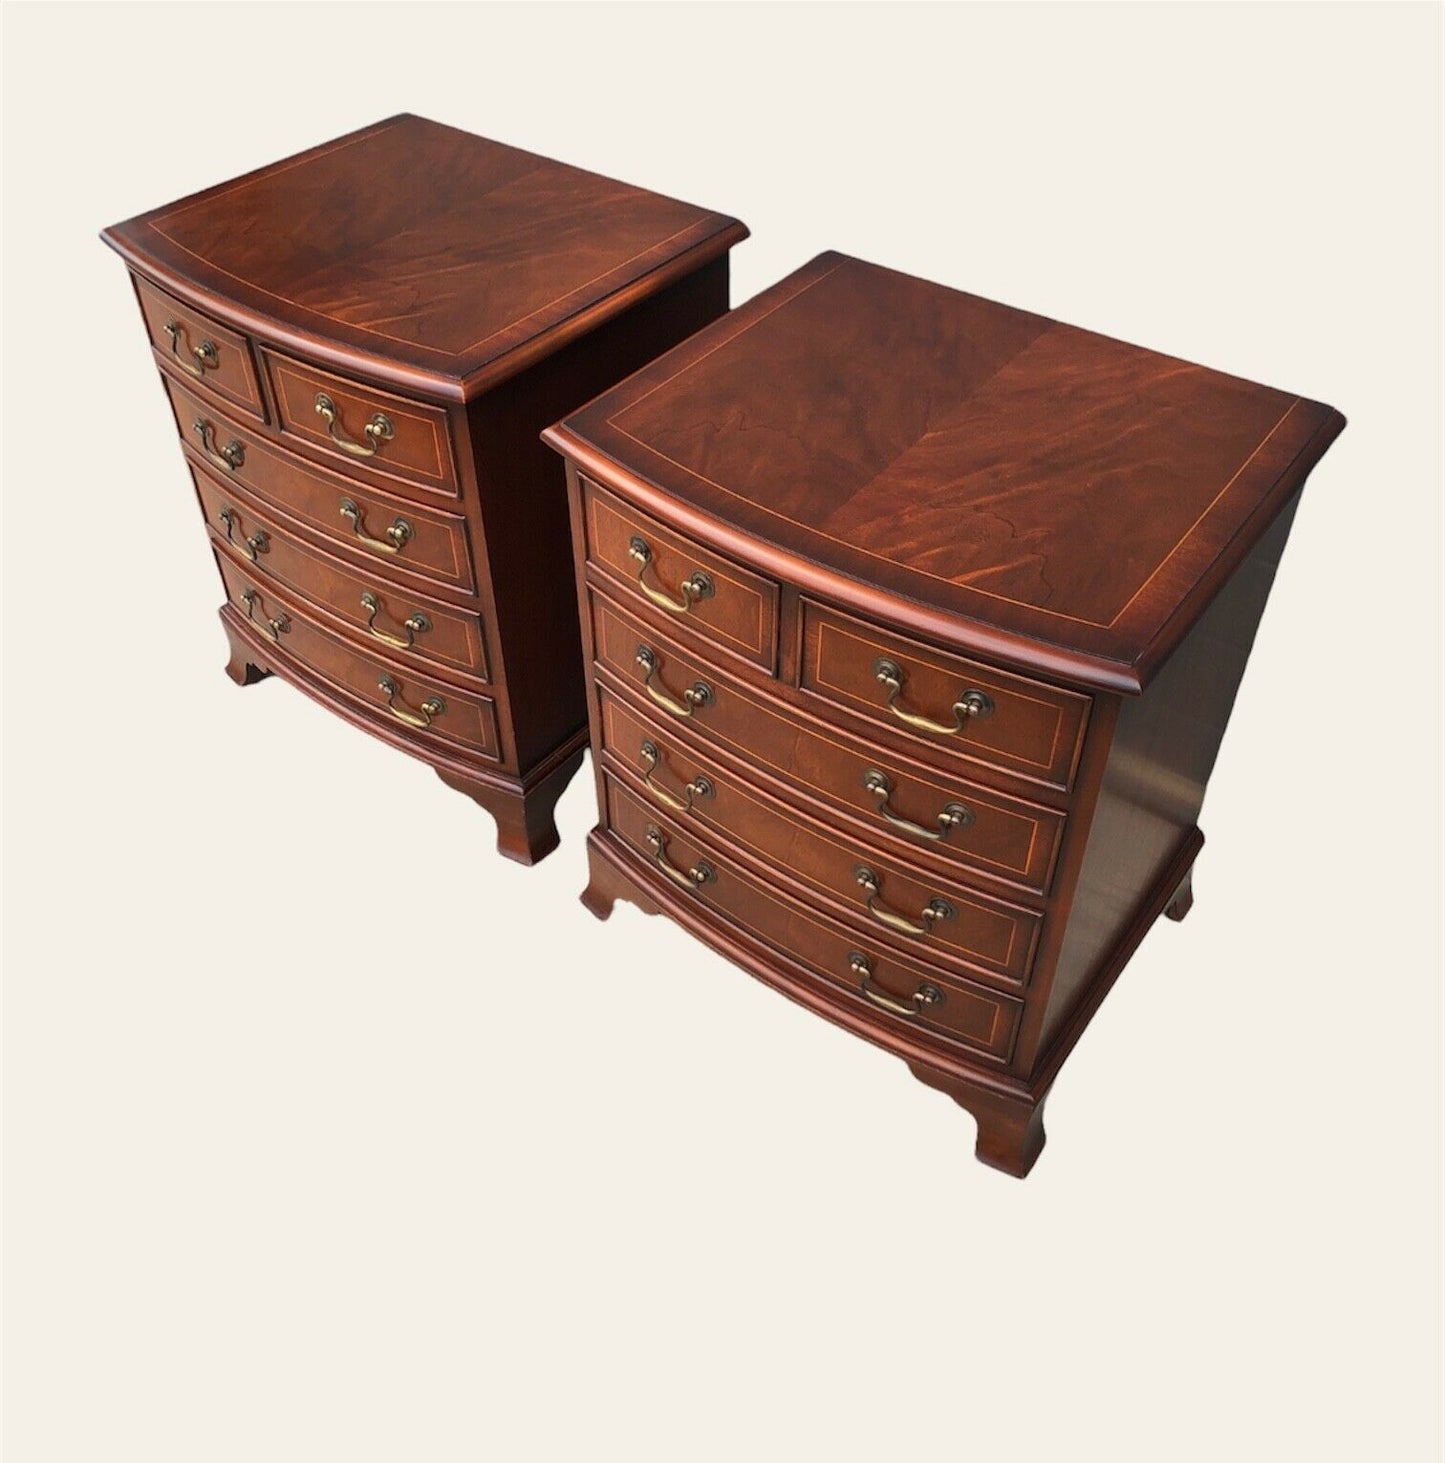 000951....Handsome Pair Vintage Bedside Chests / Small Chests Of Drawers ( sold )